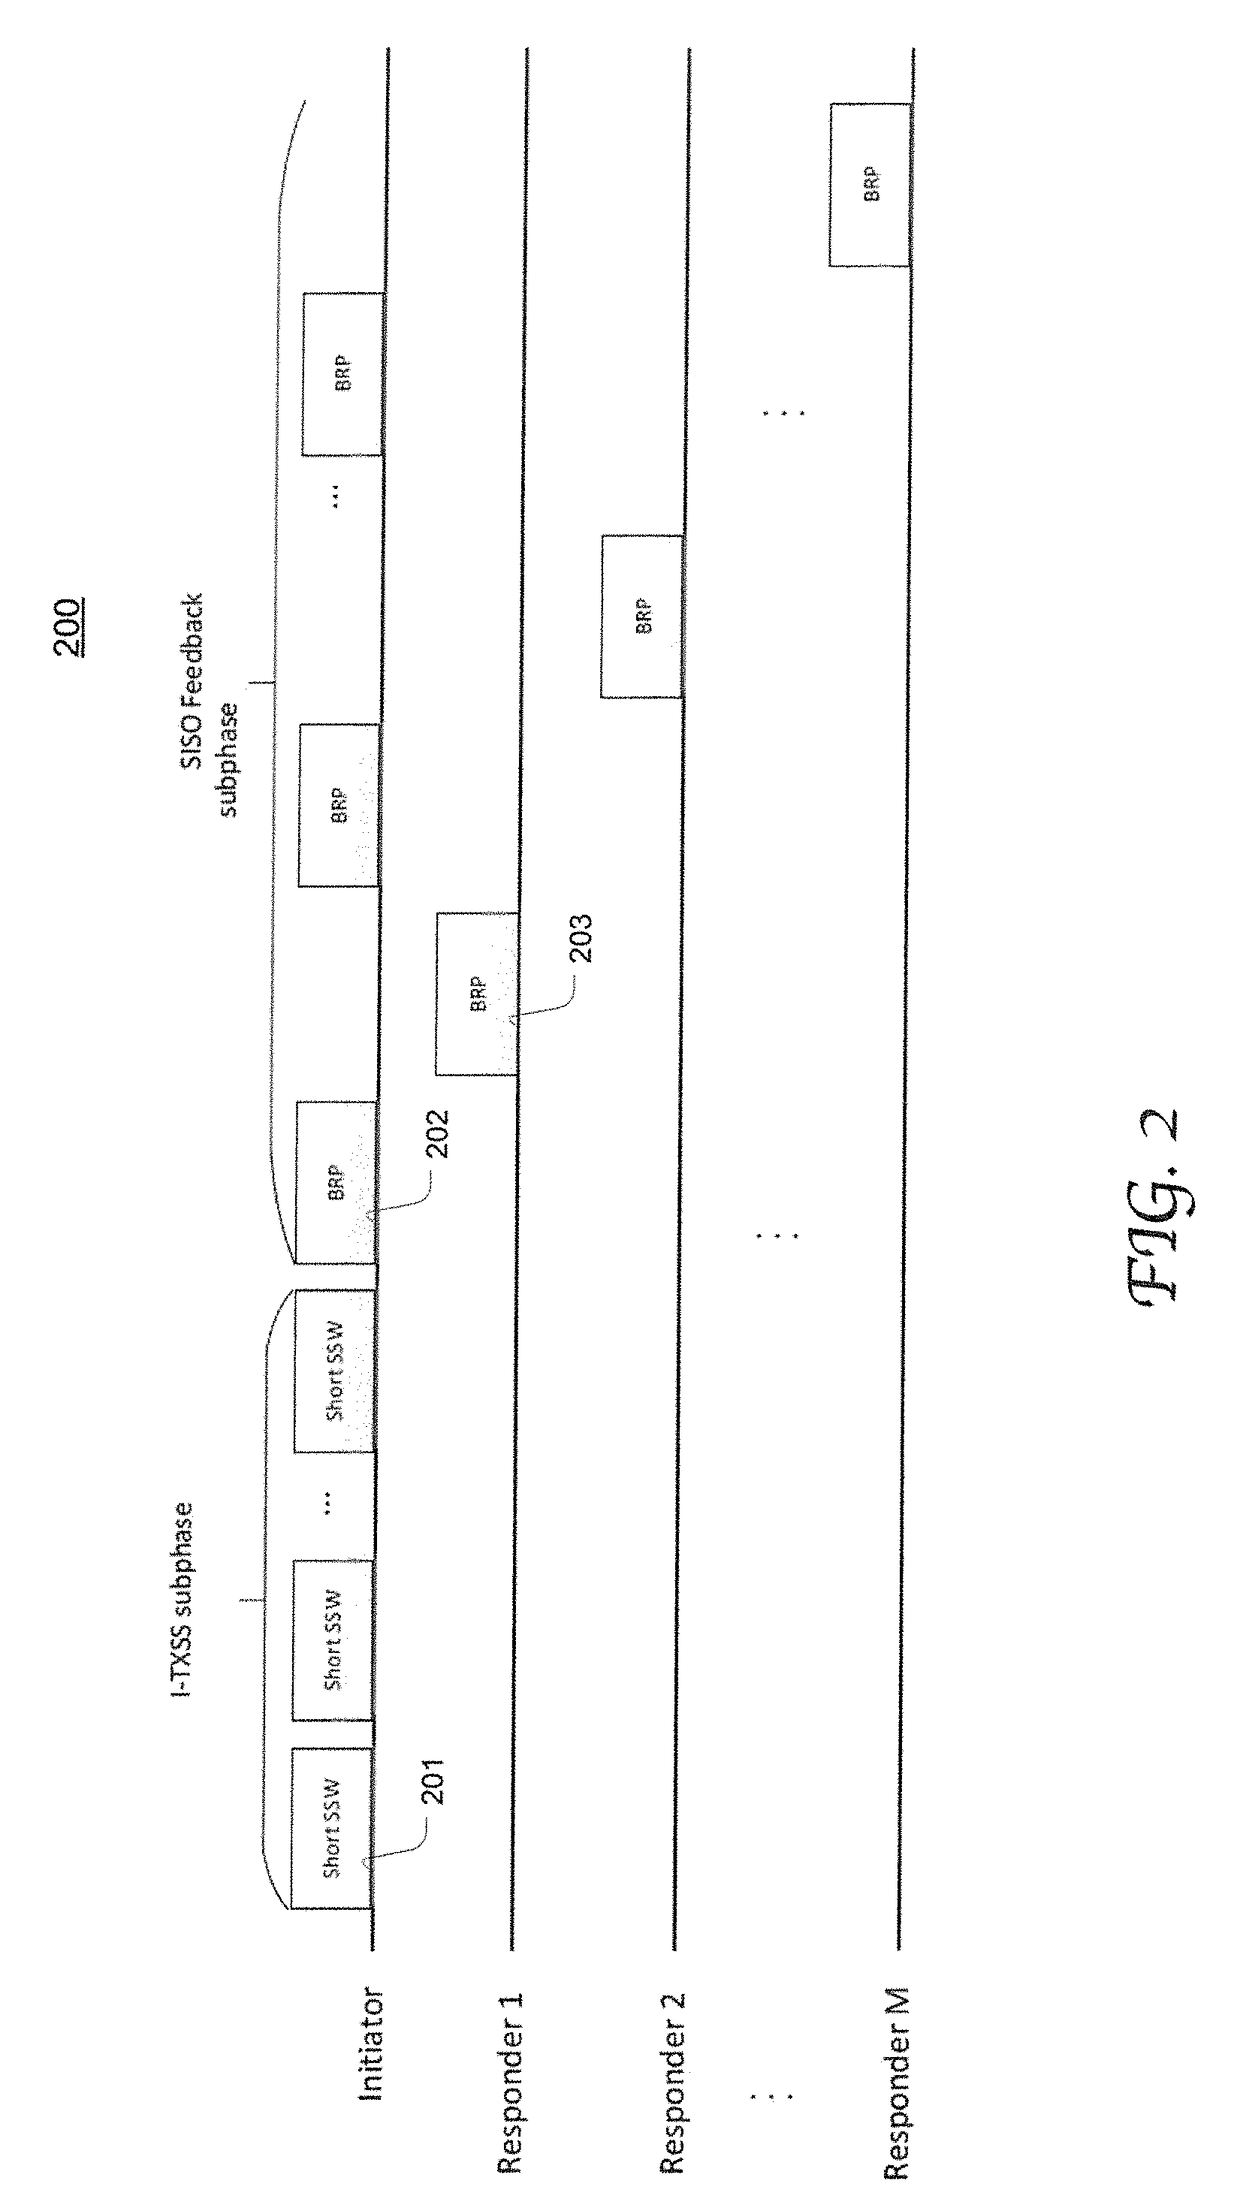 Multi-user multiple-input multiple-output (MU-MIMO) operation and user selection